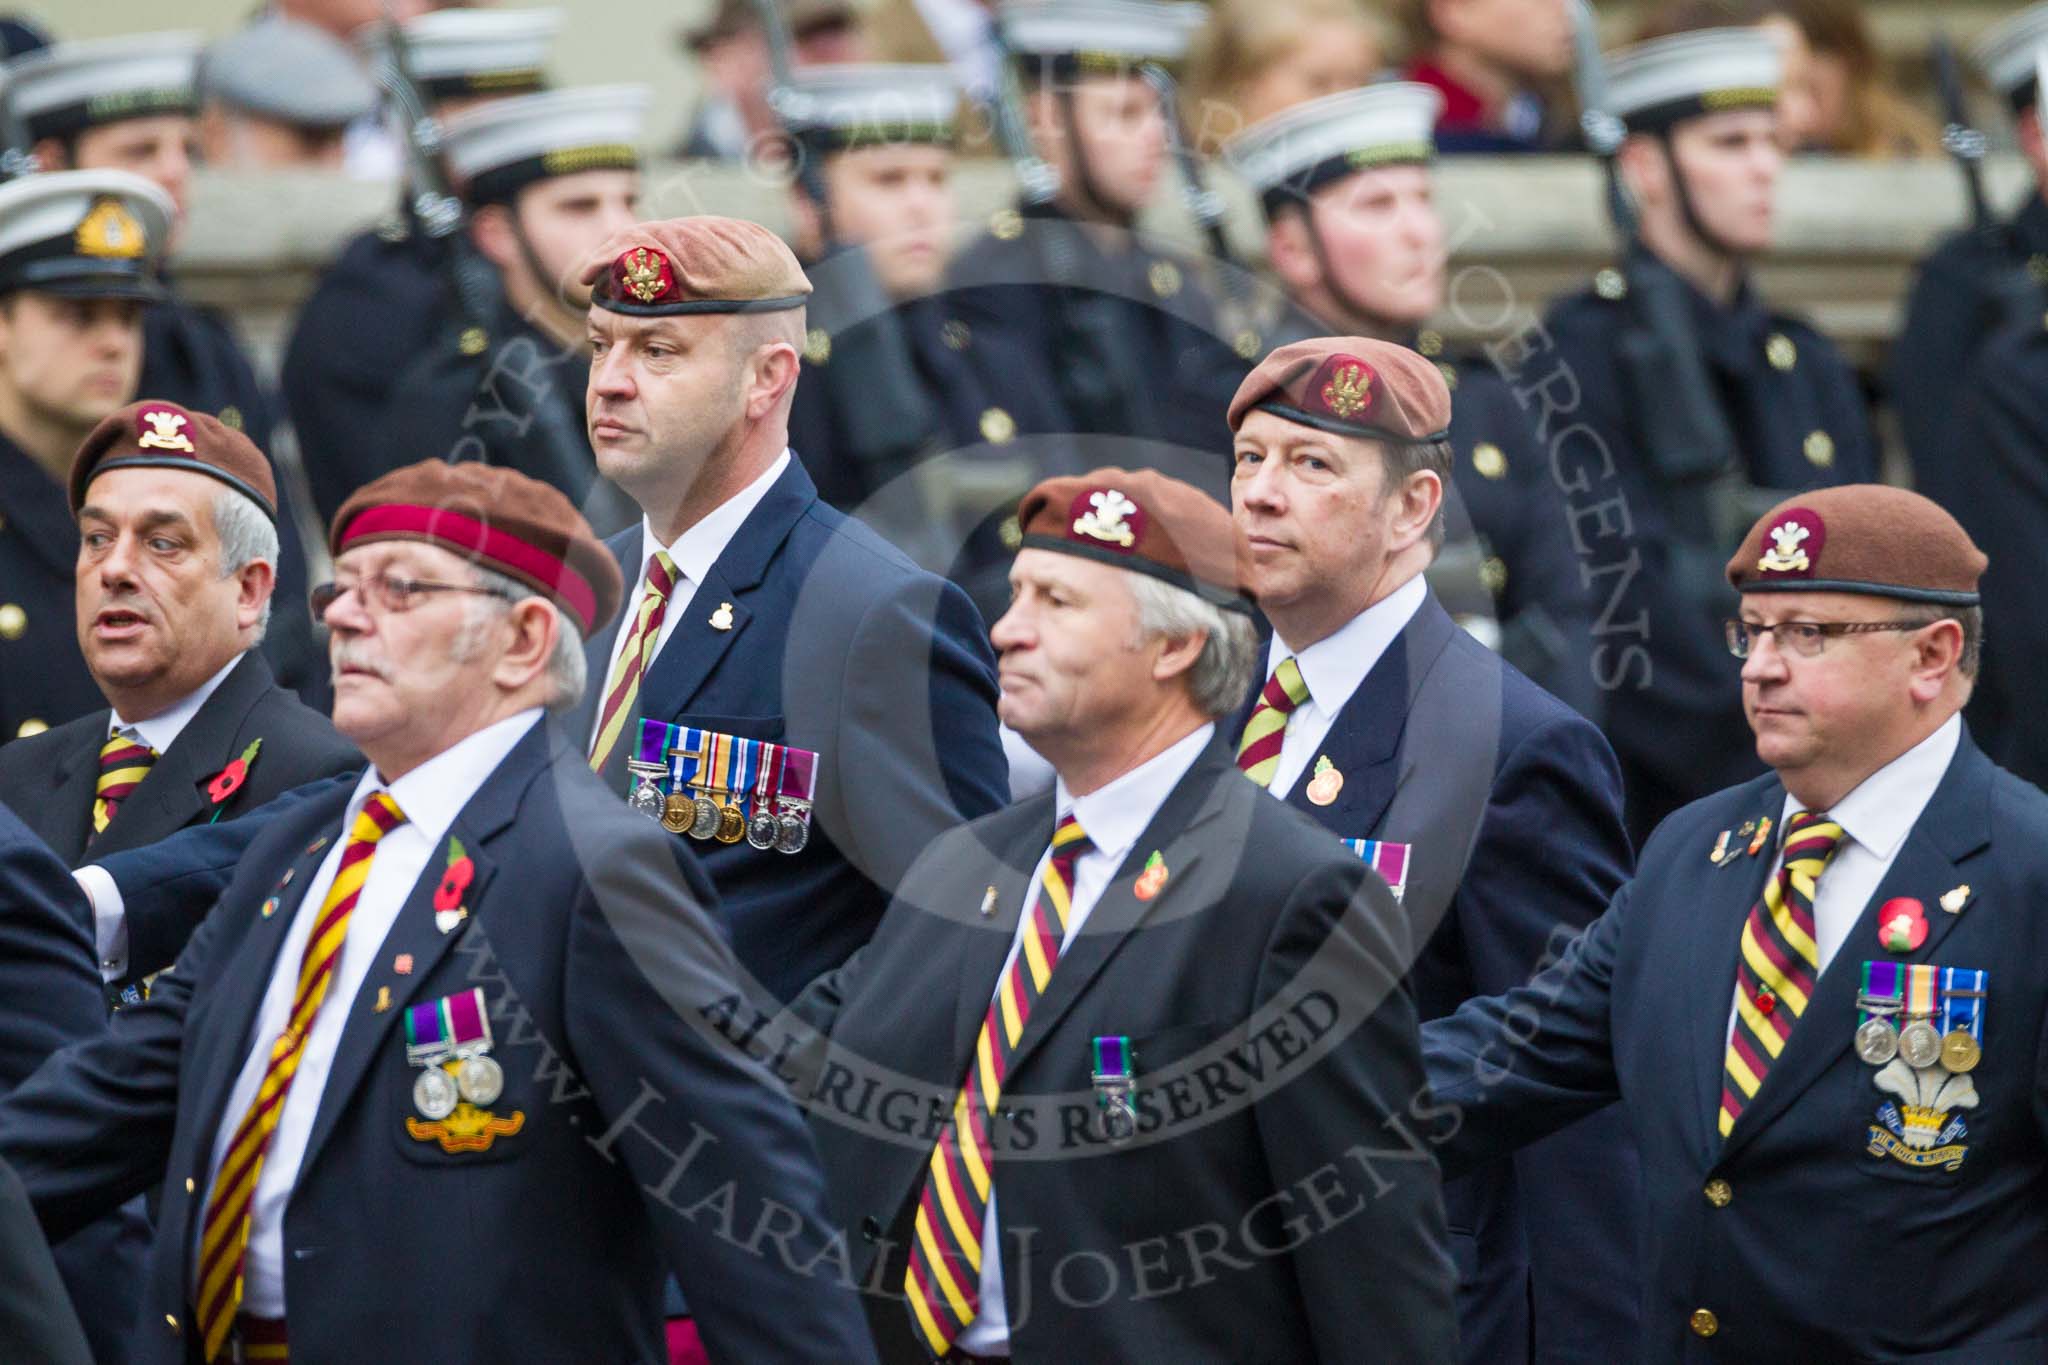 Remembrance Sunday at the Cenotaph 2015: Group B25, Kings Royal Hussars Regimental Association.
Cenotaph, Whitehall, London SW1,
London,
Greater London,
United Kingdom,
on 08 November 2015 at 11:41, image #204